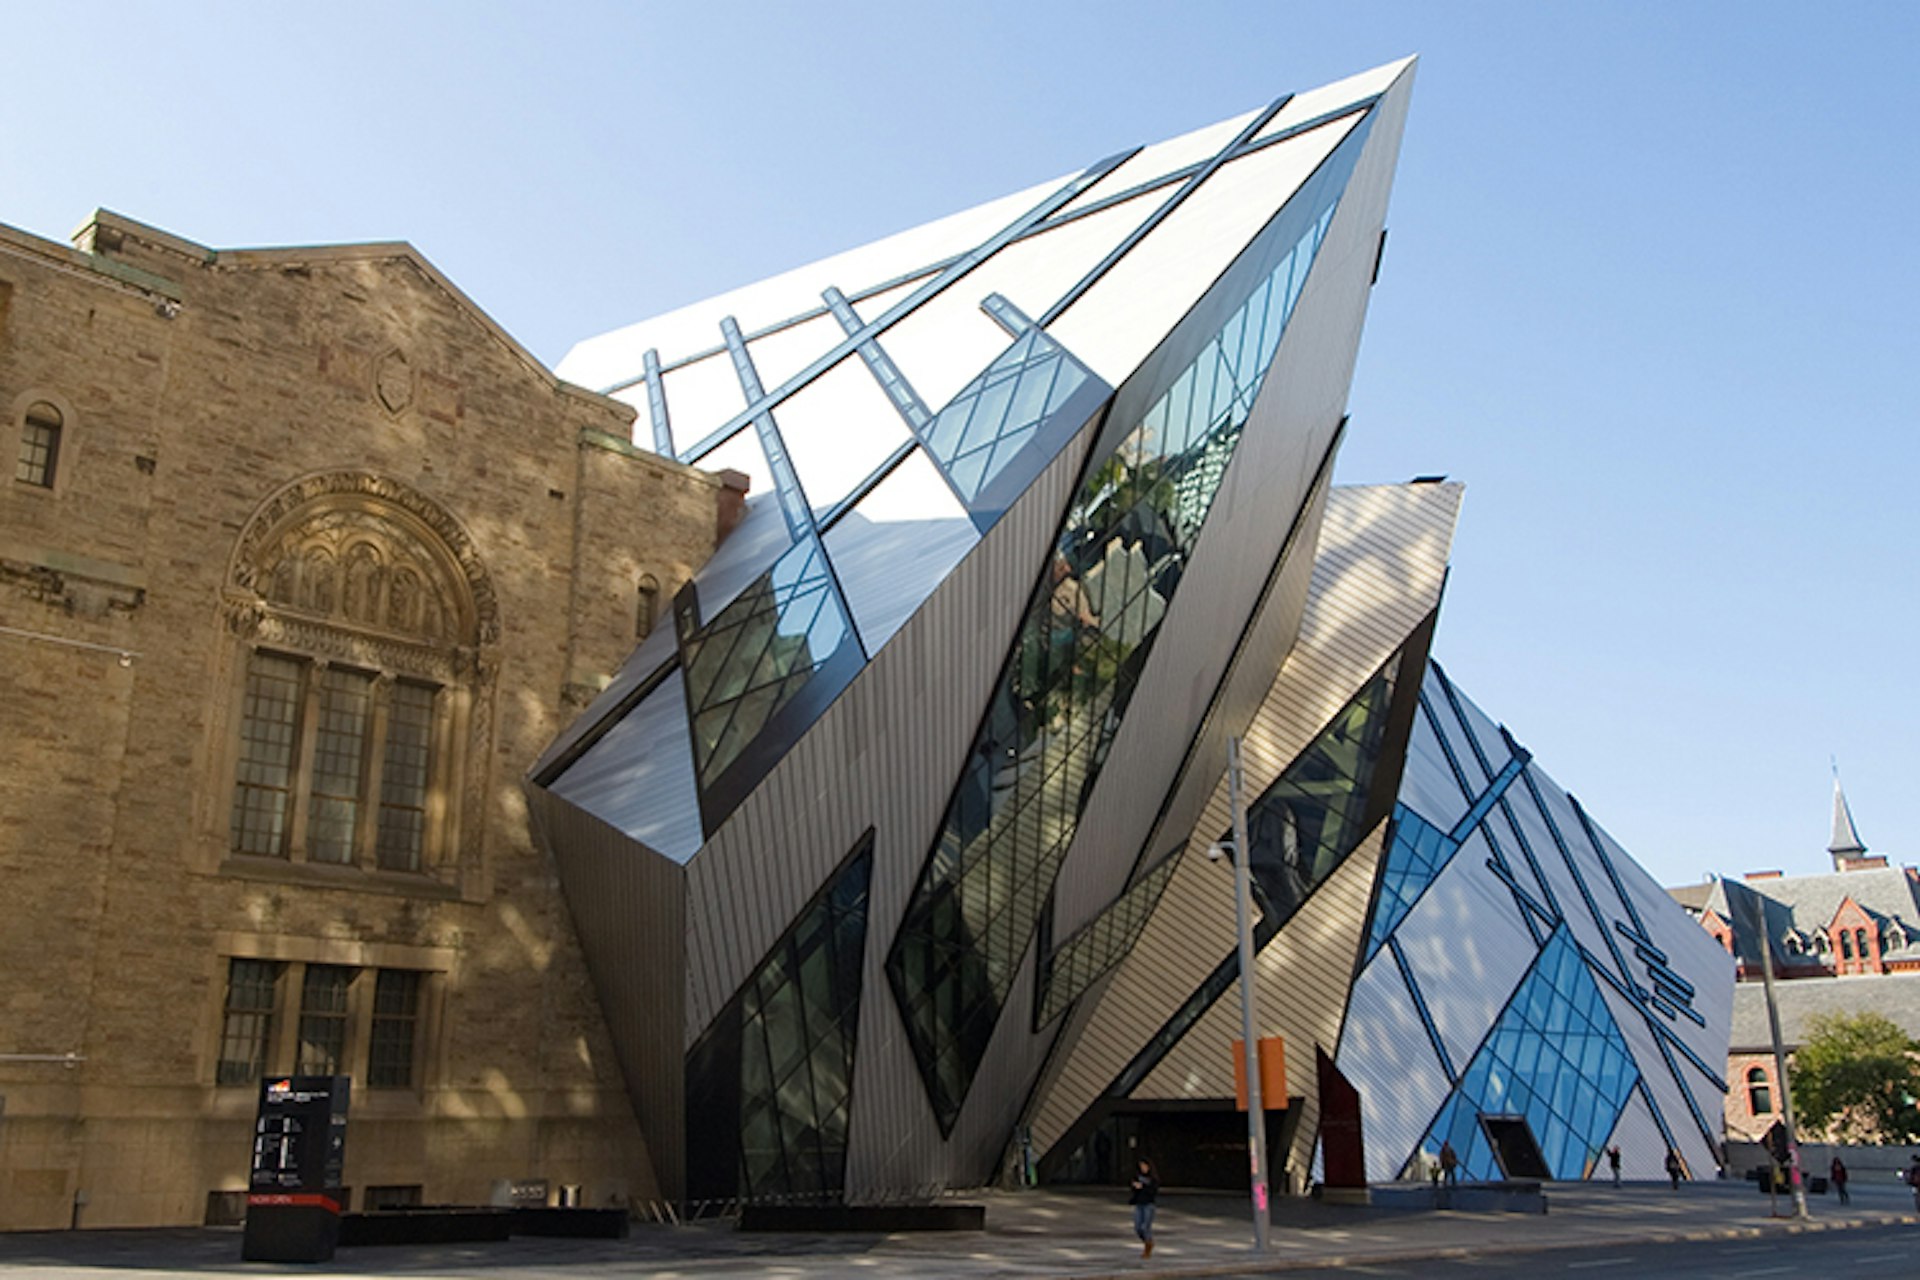 Designed by architect Daniel Libeskind, the Michael Lee-Chin Crystal is the centerpiece of the Royal Ontario Museum. Image by The City of Toronto / CC by 2.0